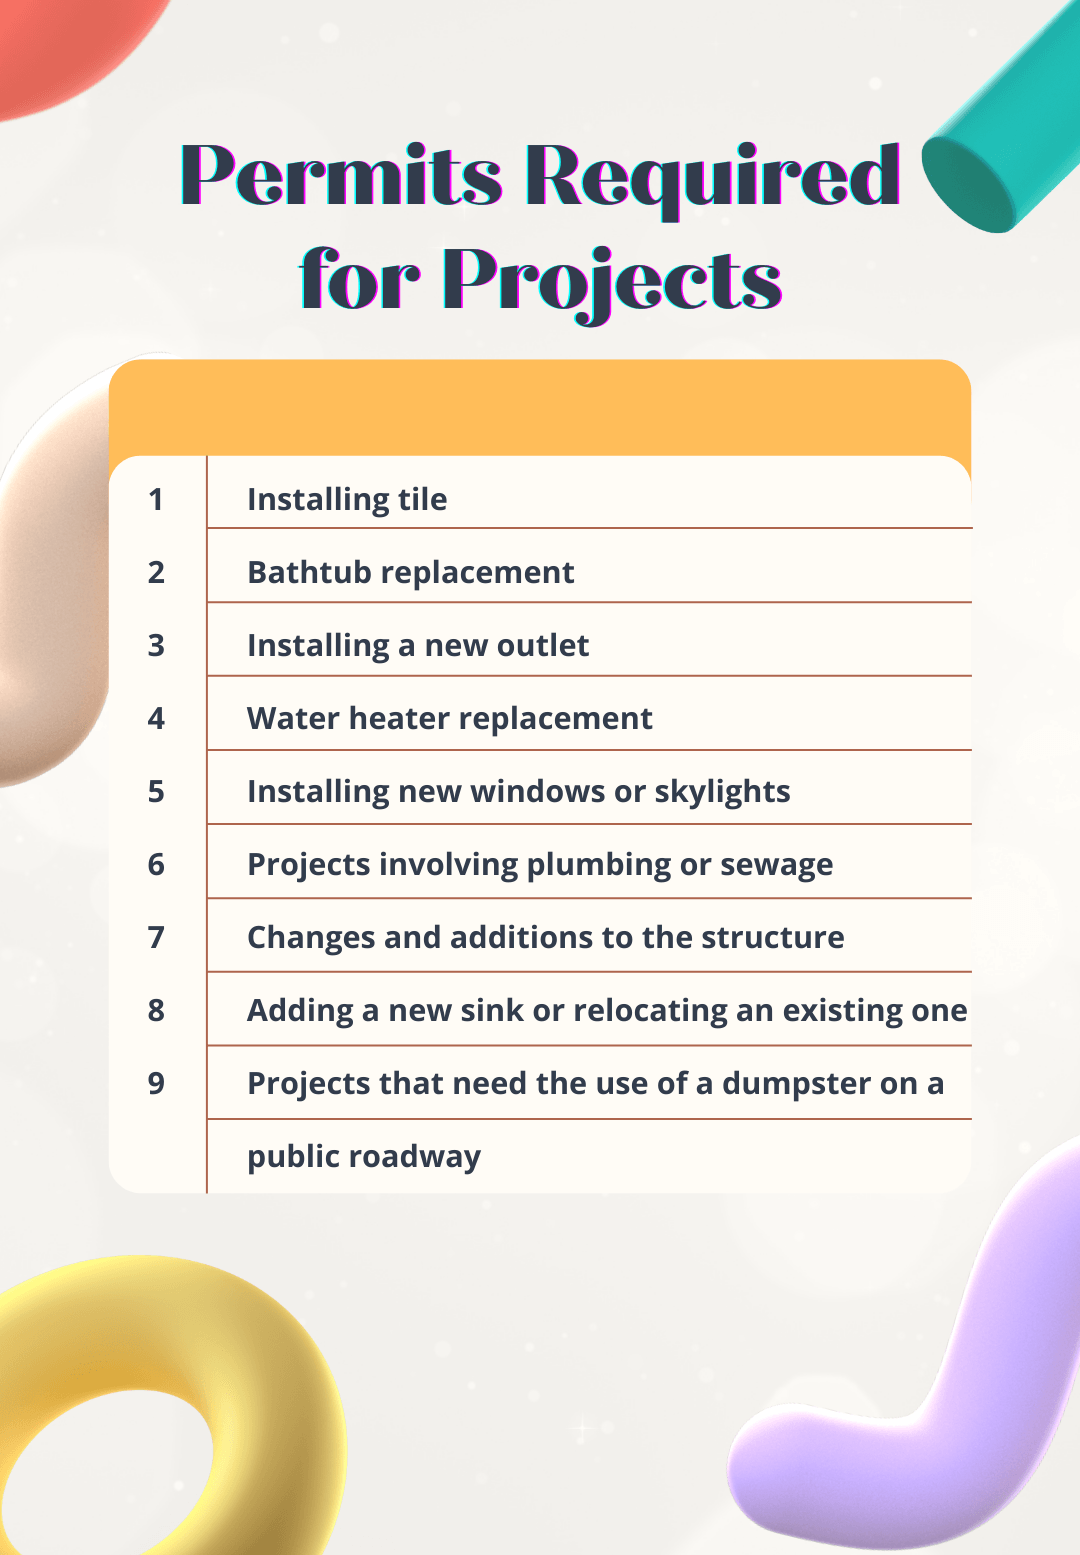 permit required for projects infographic